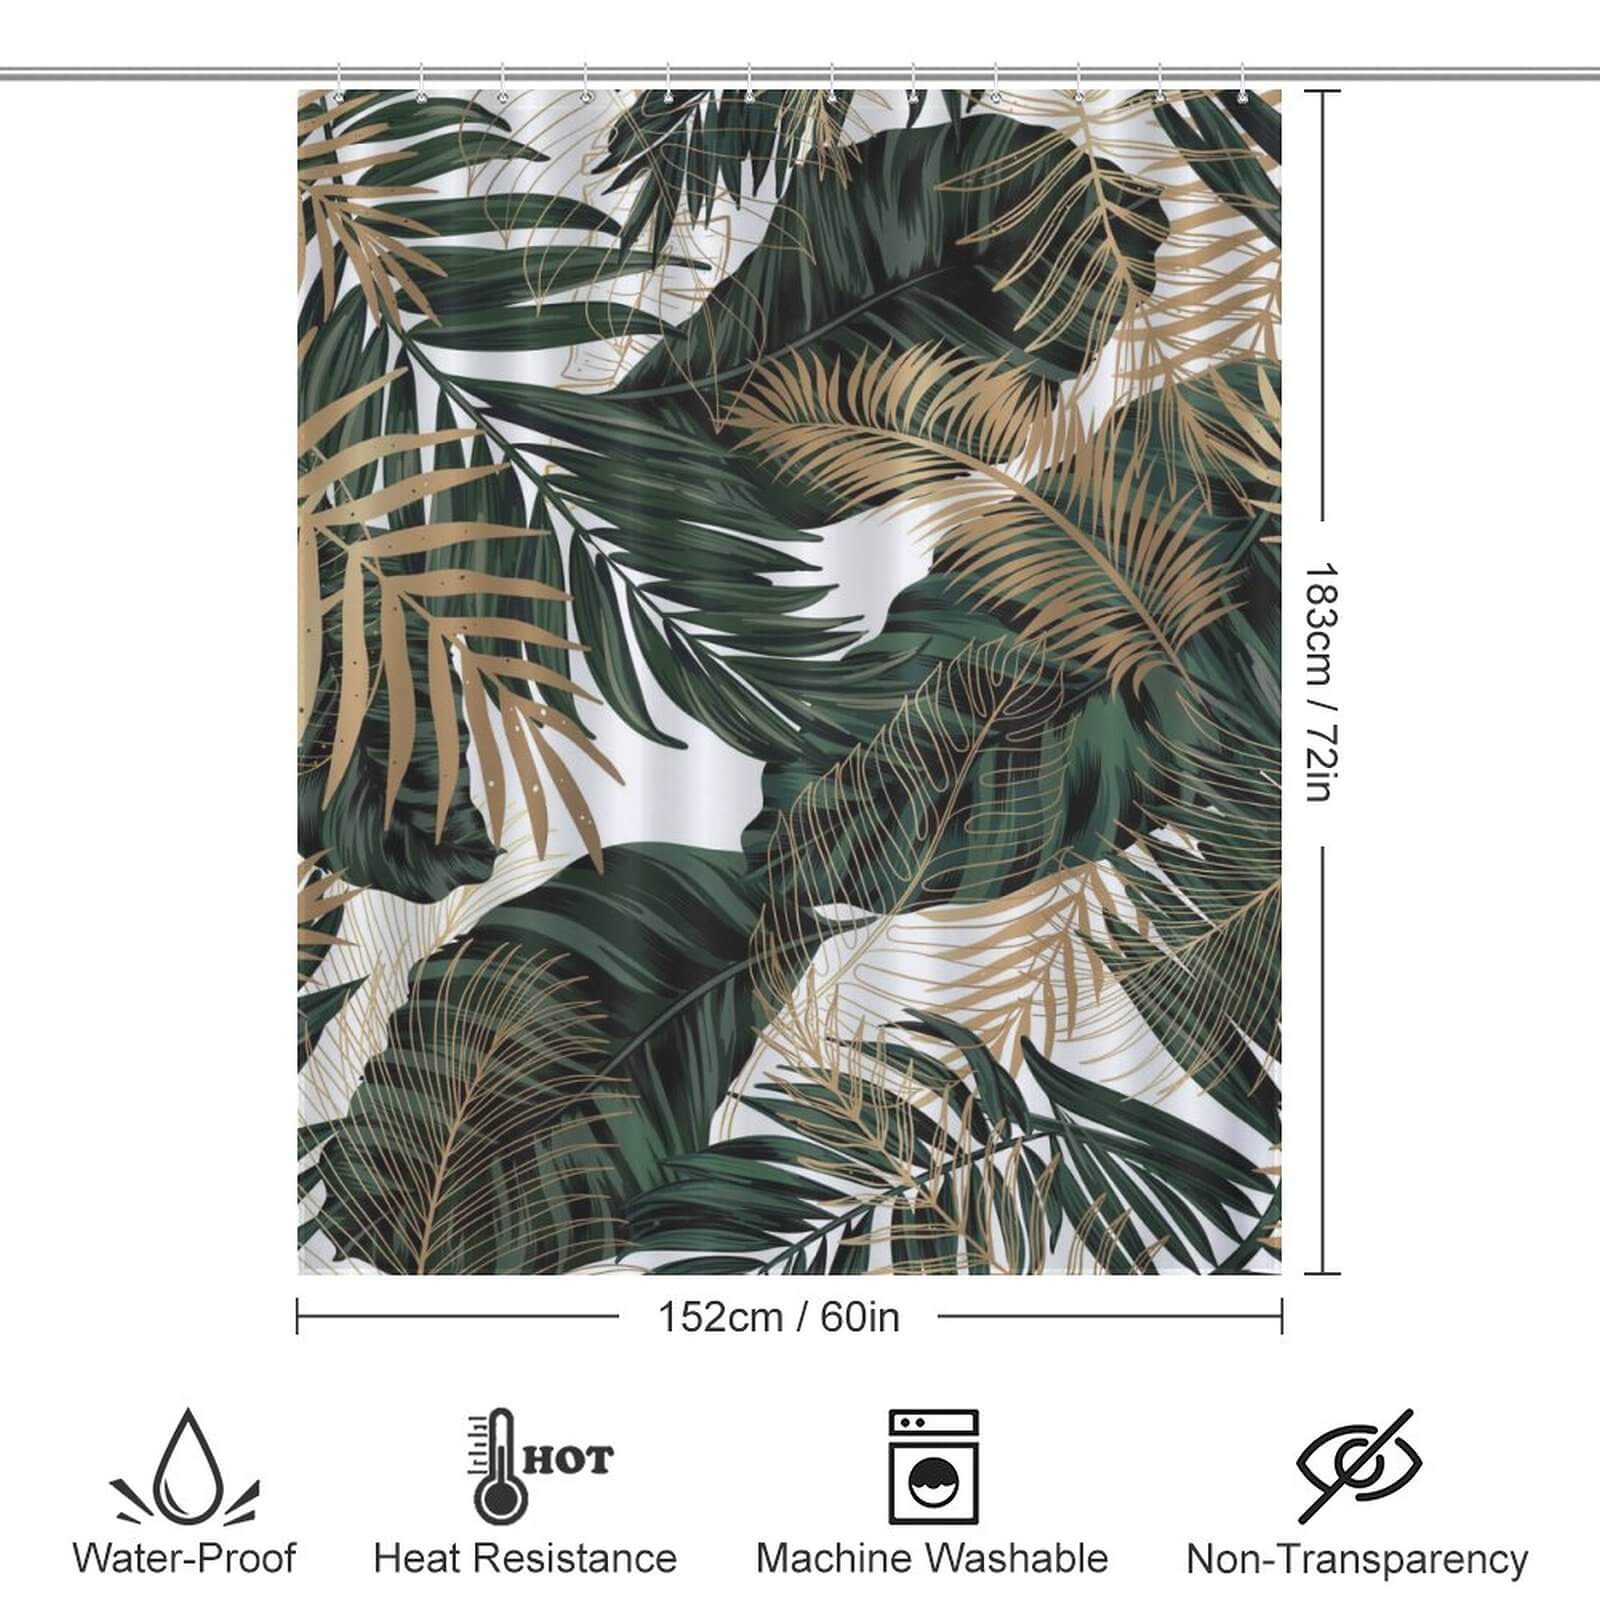 A Tropical Leaves Jungle Shower Curtain by Cotton Cat, with measurements, perfect for bathroom decor.